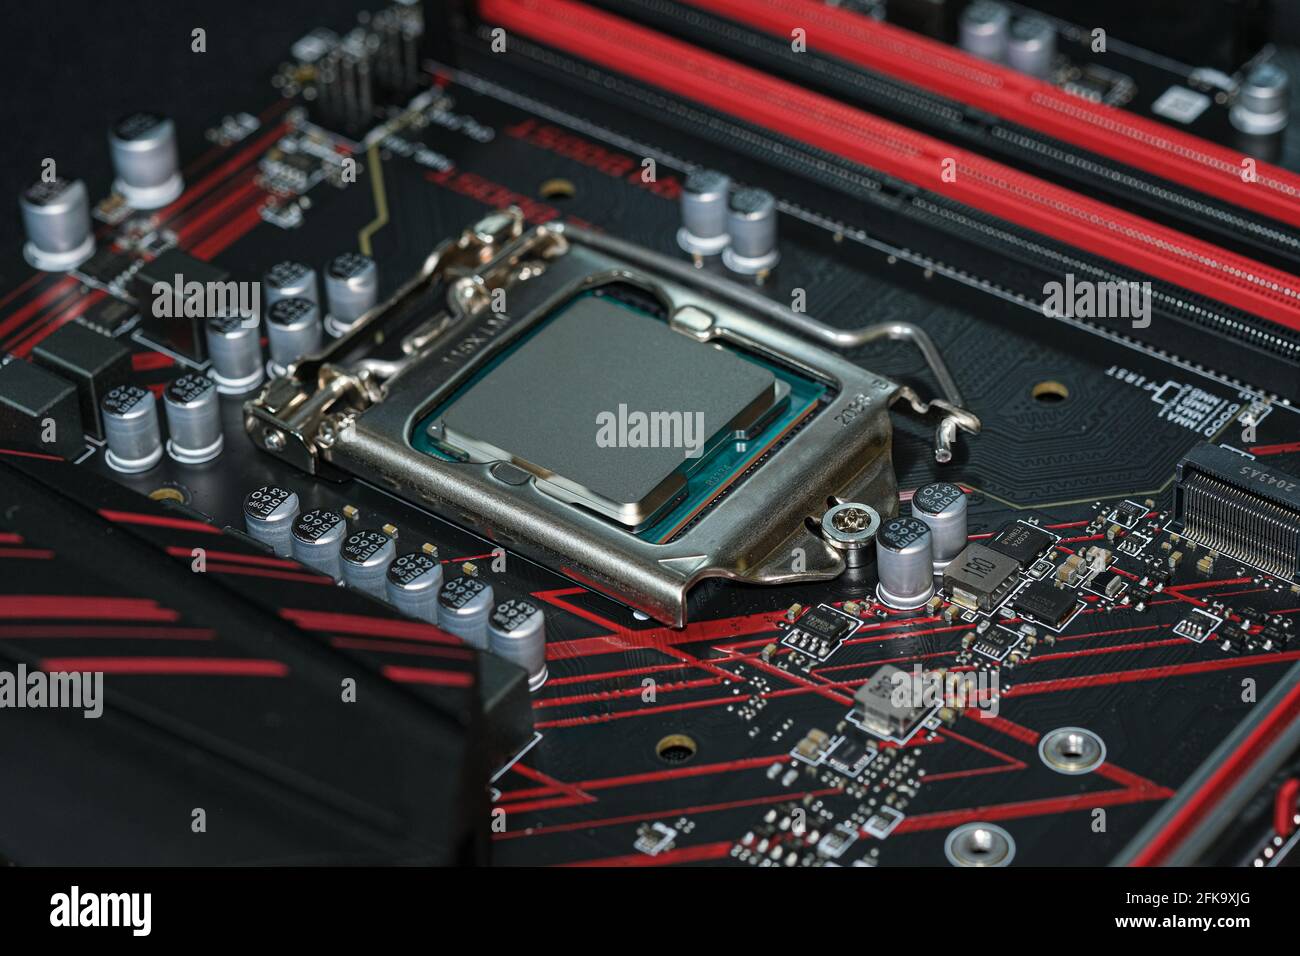 Desktop pc cpu installed on hi tech motherboard,computer components chip Stock Photo